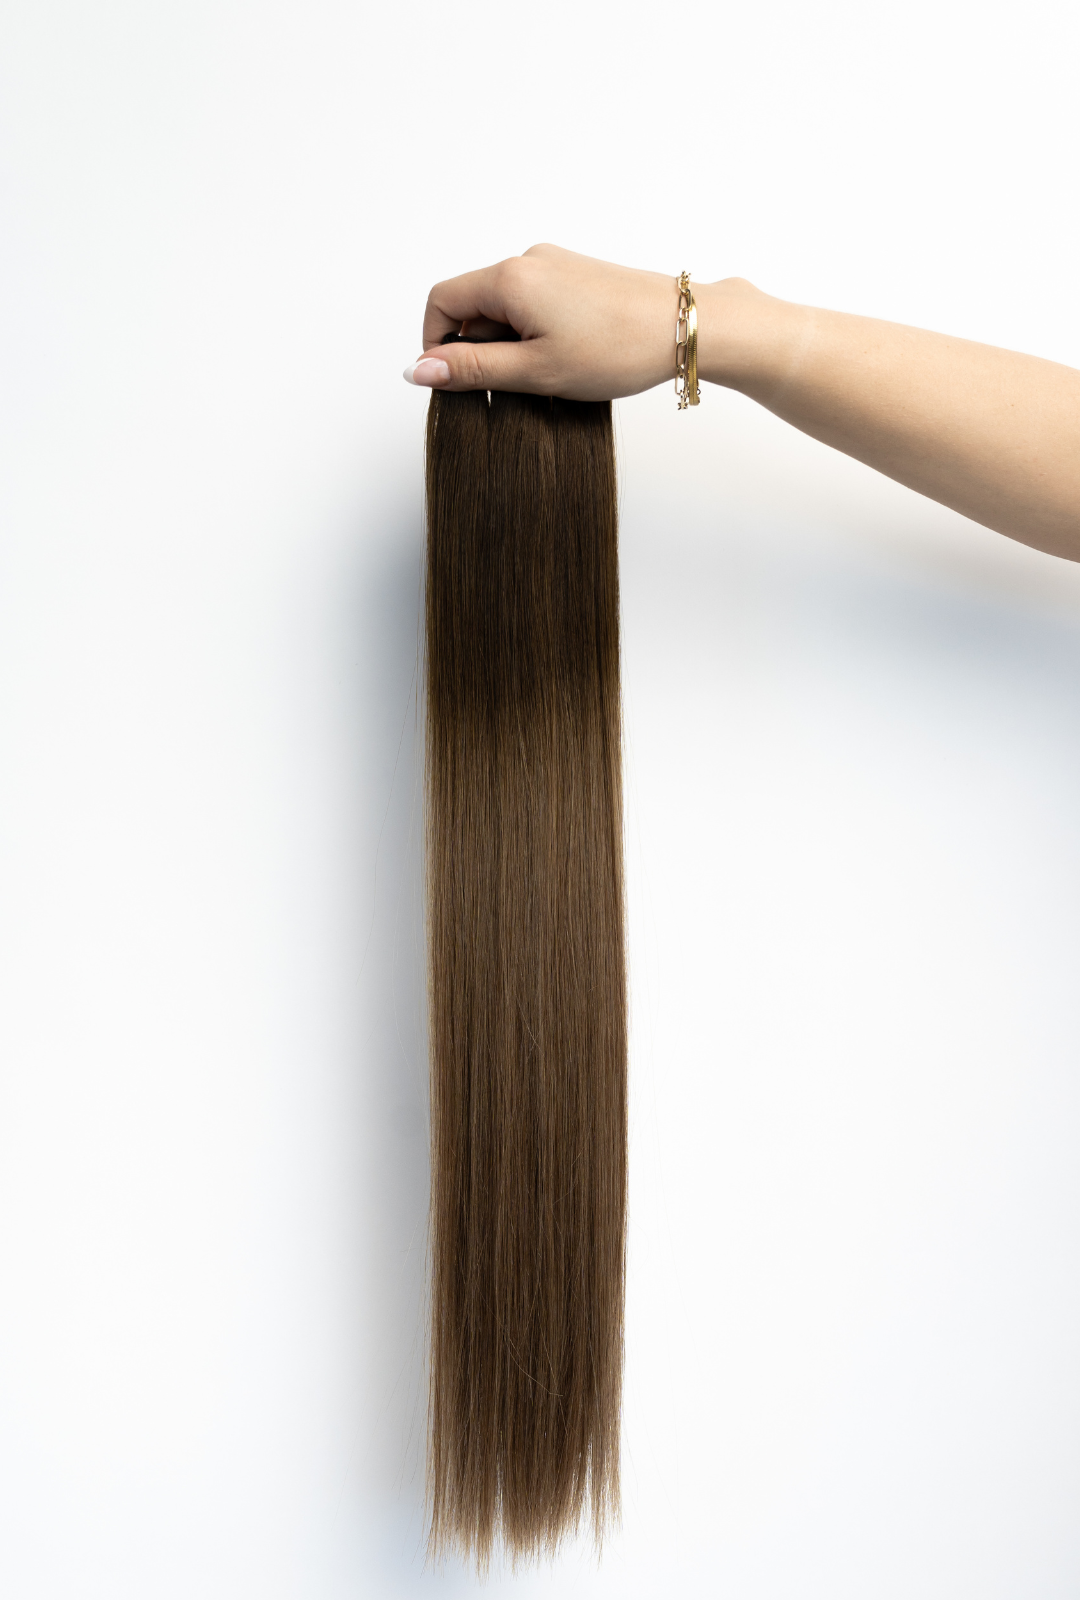 Halfsies Machine Sewn Weft Extensions Ombré #3/8 (Spiced Cider)